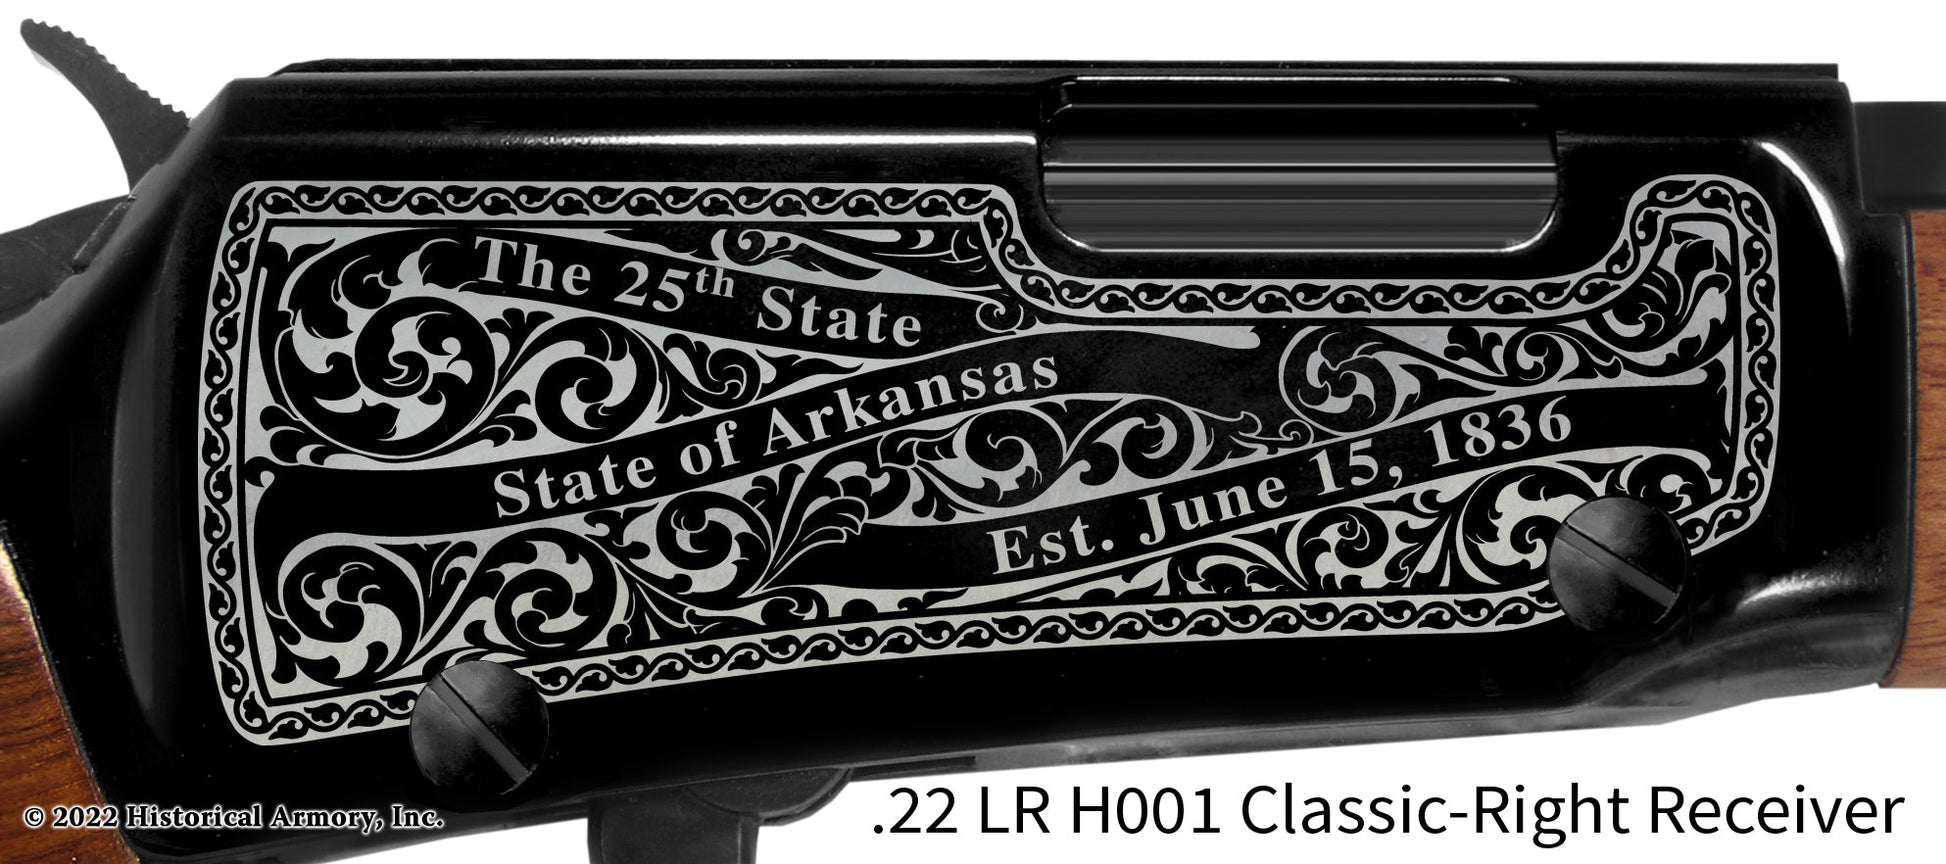 Union County Arkansas Engraved Henry H001 Rifle